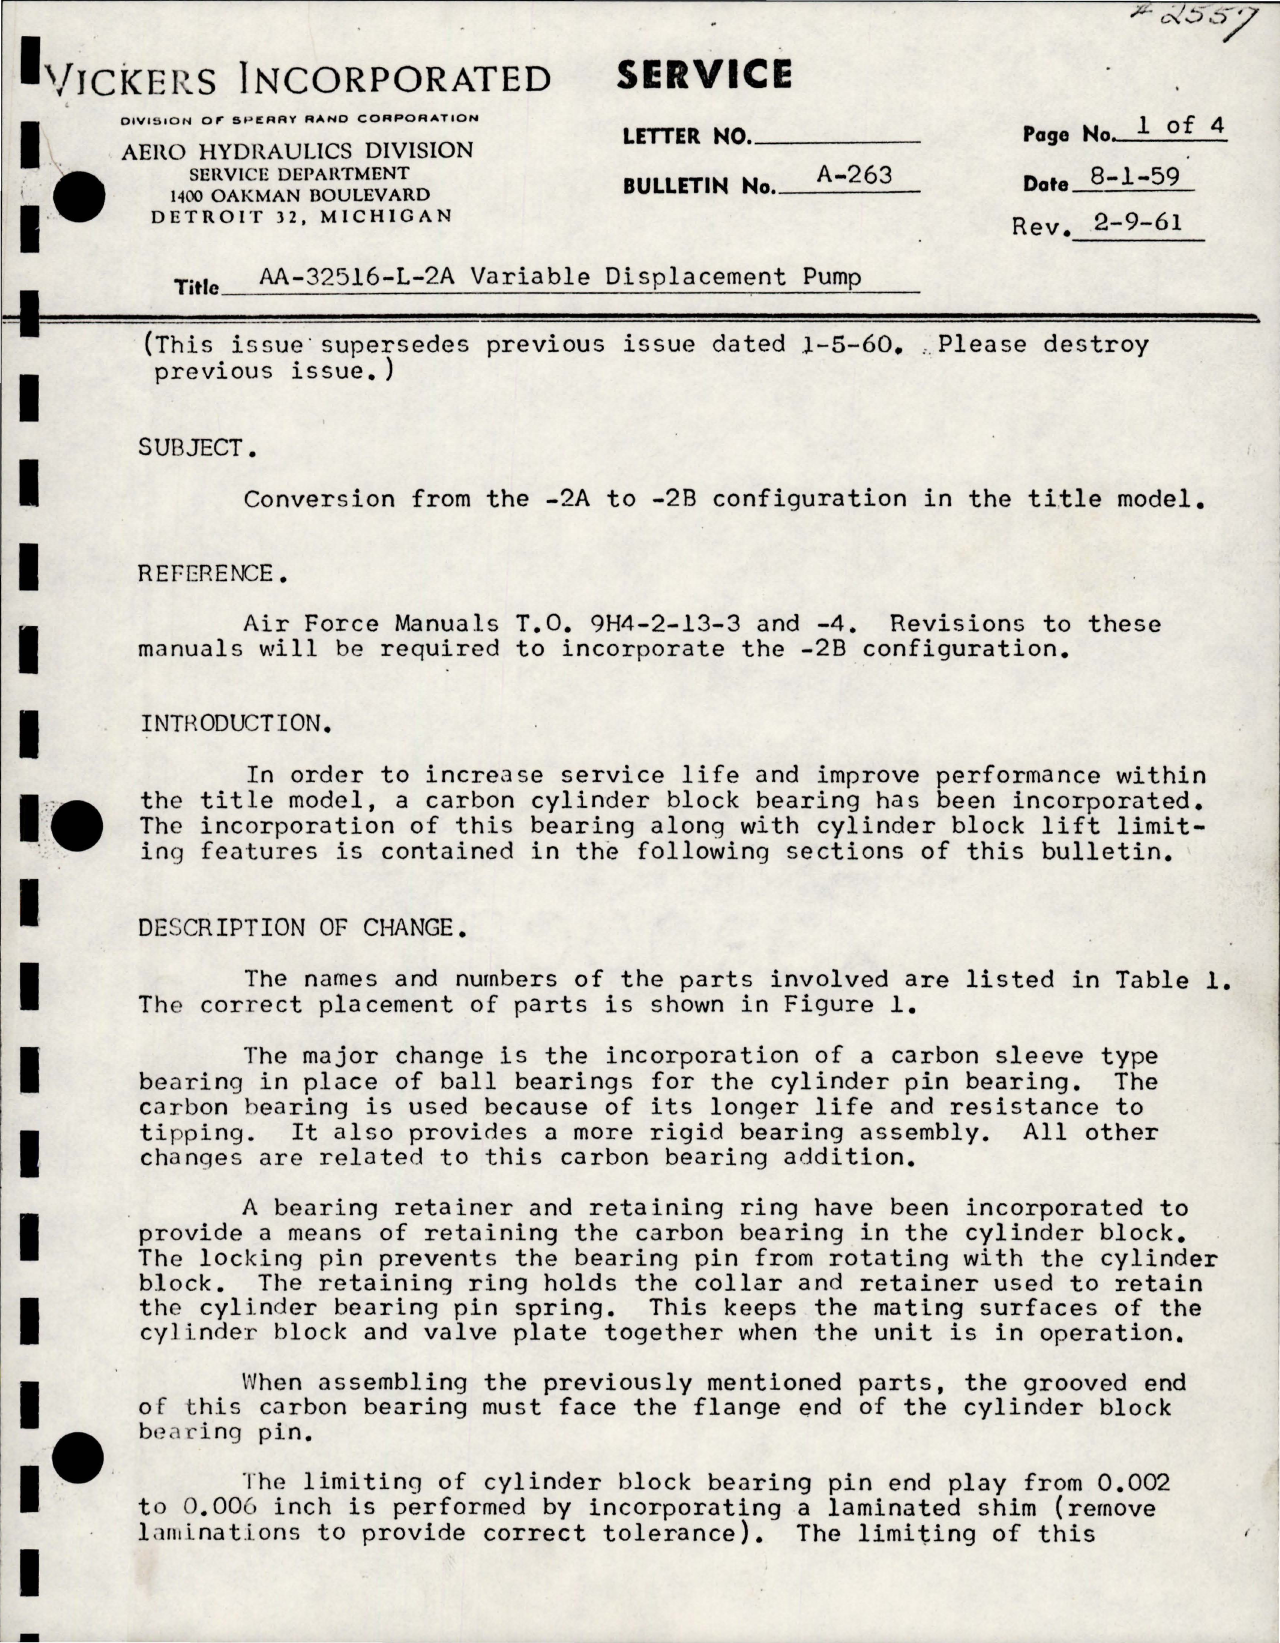 Sample page 1 from AirCorps Library document: Variable Displacement Pump - AA-32516-L-2A